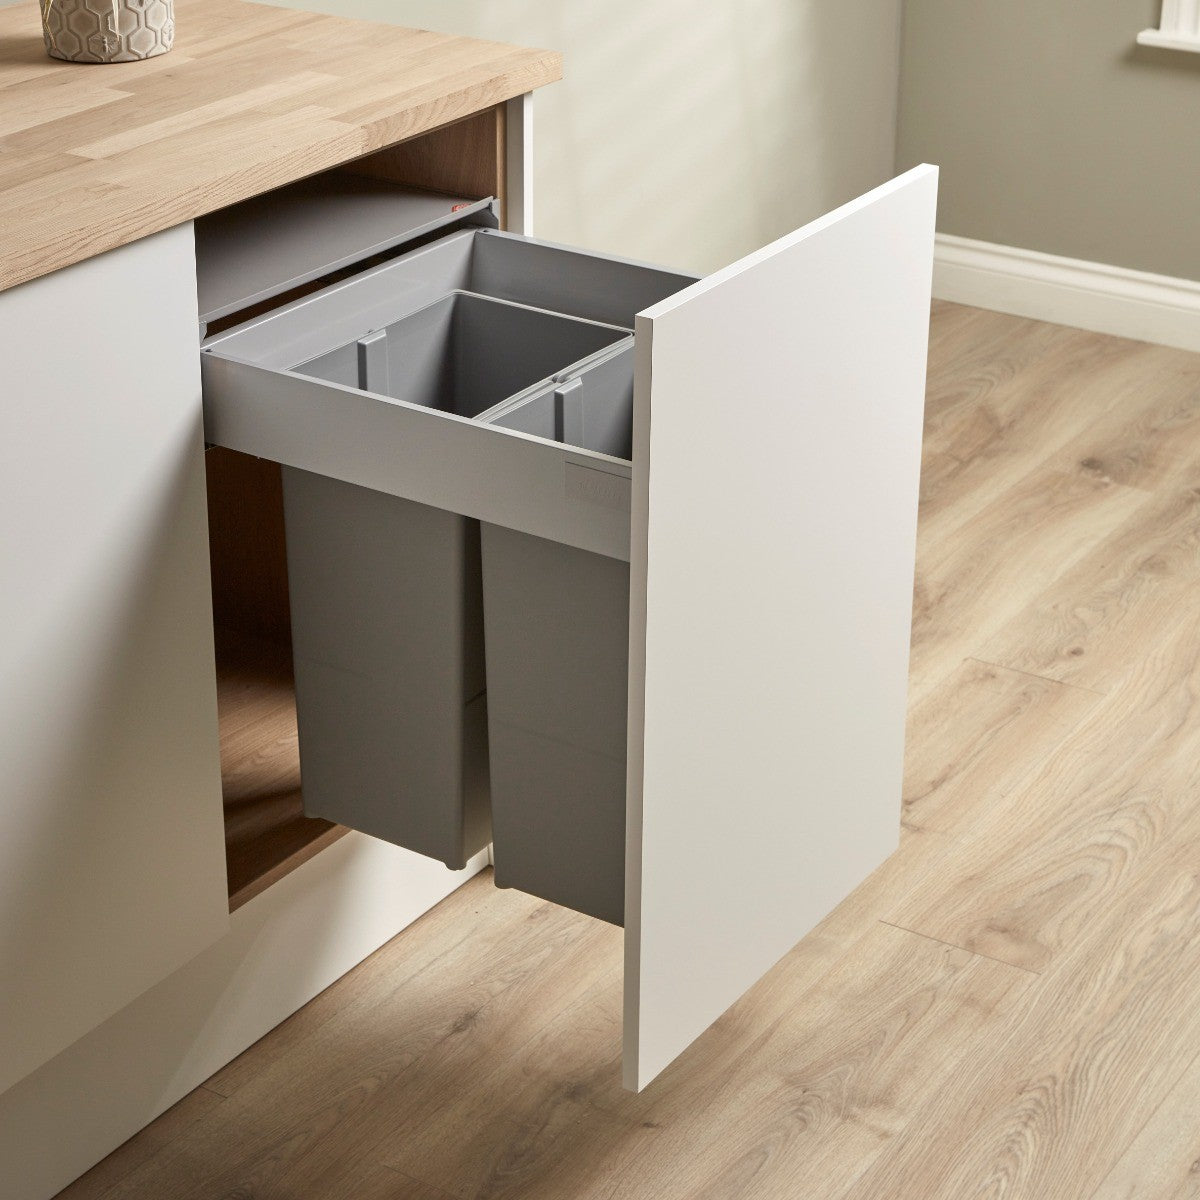 68L Integrated Pull Out Kitchen Waste & Recycling Bin for 500mm Cabinet  Under Counter Storage 1 x 34L + 2 x 17L Compartments